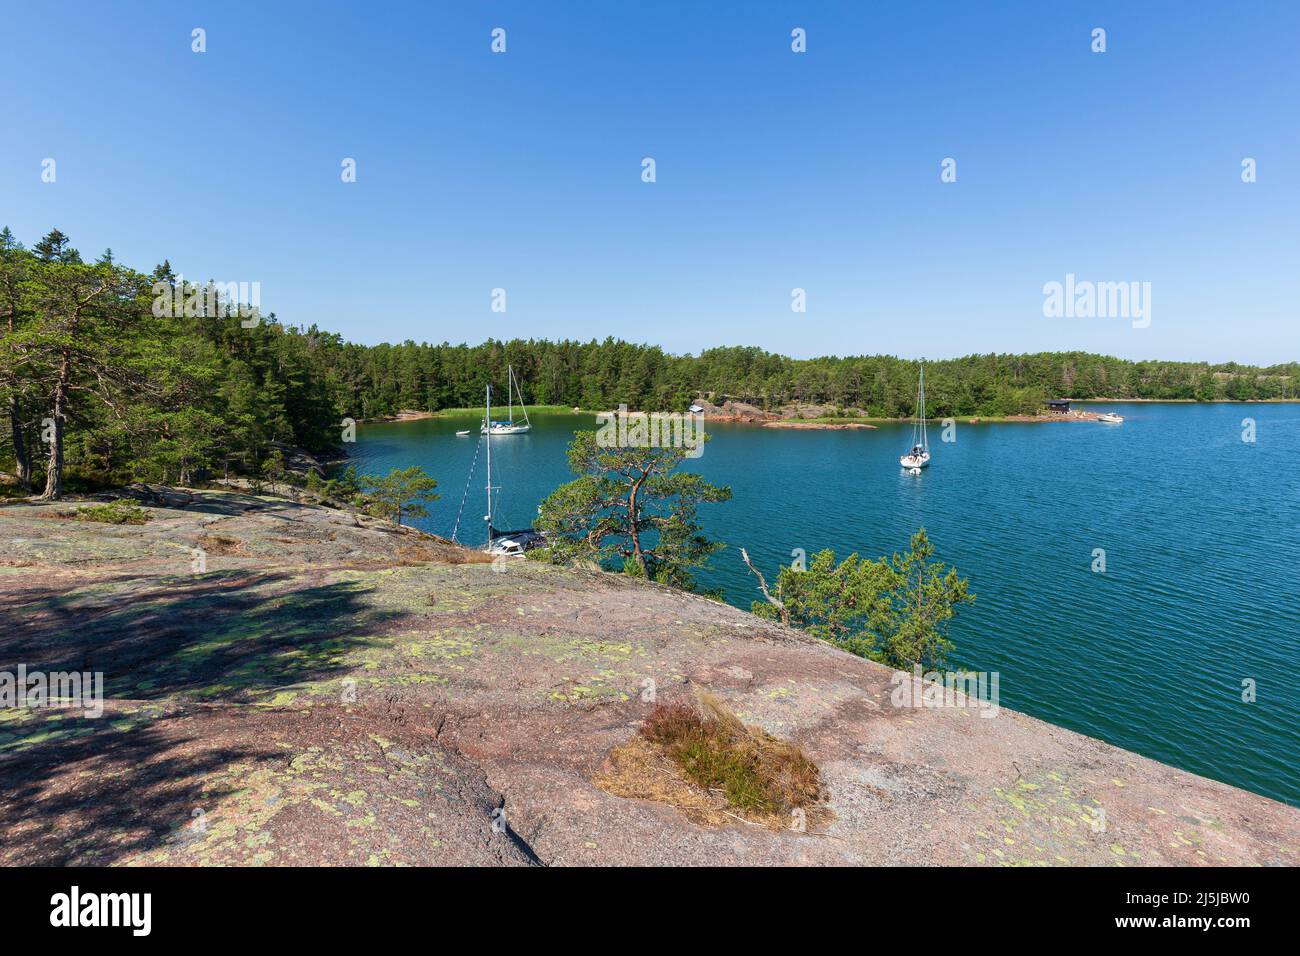 View of moored sailboats at sea and forested shoreline from a cliff along the Grottstigen cave nature trail at Geta in Åland Islands, Finland. Stock Photo